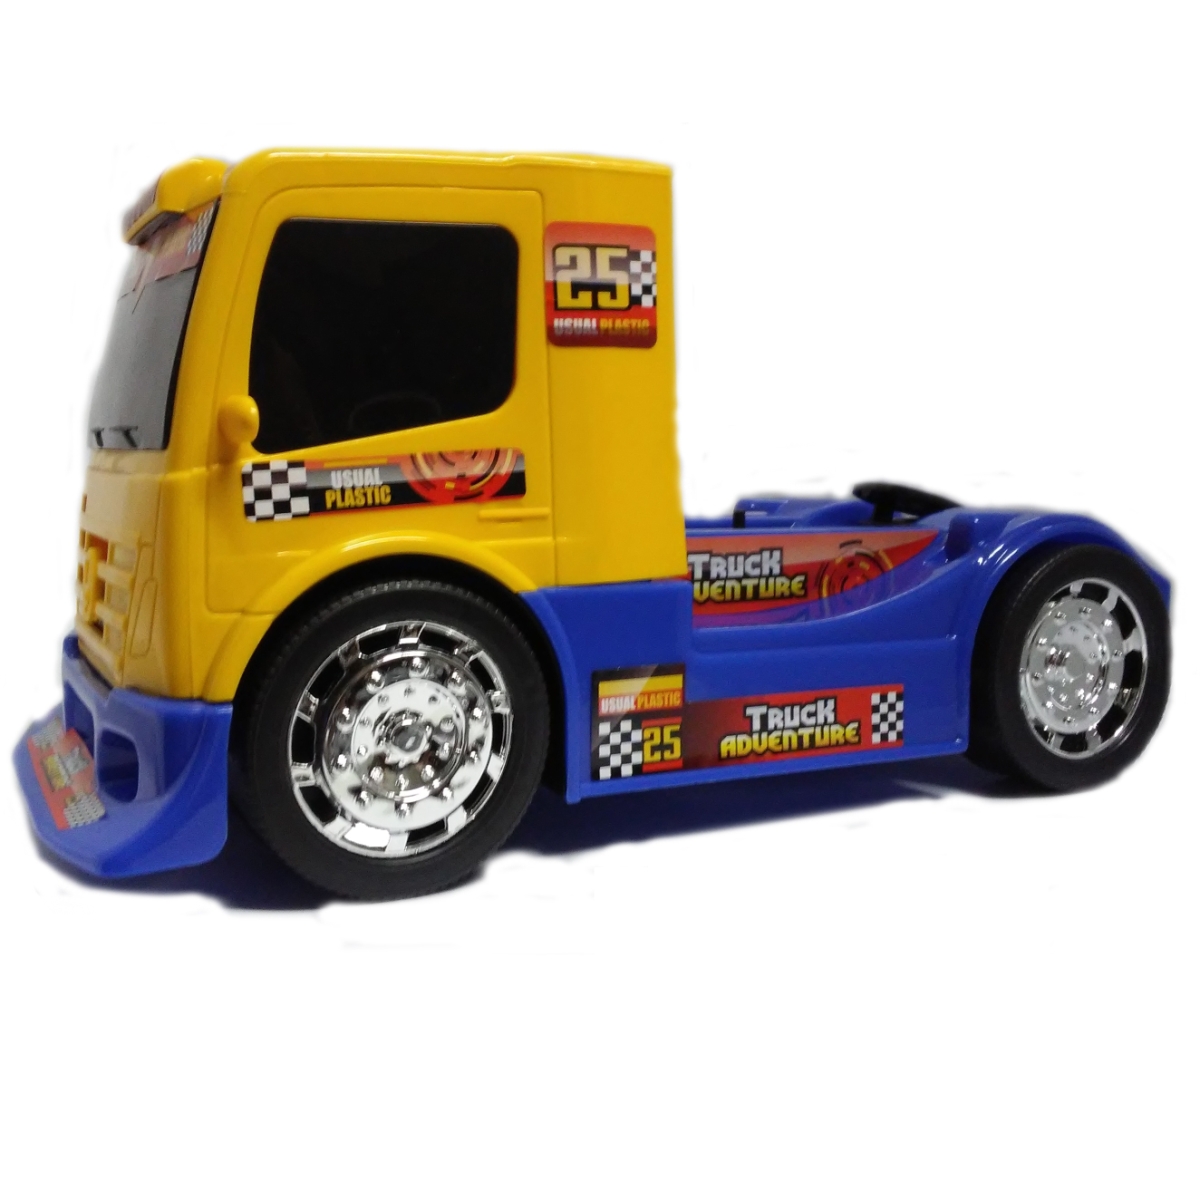 Caminhao Fast Truck - Usual Plastic - 104 Cabine Amarelo Chassi Azul